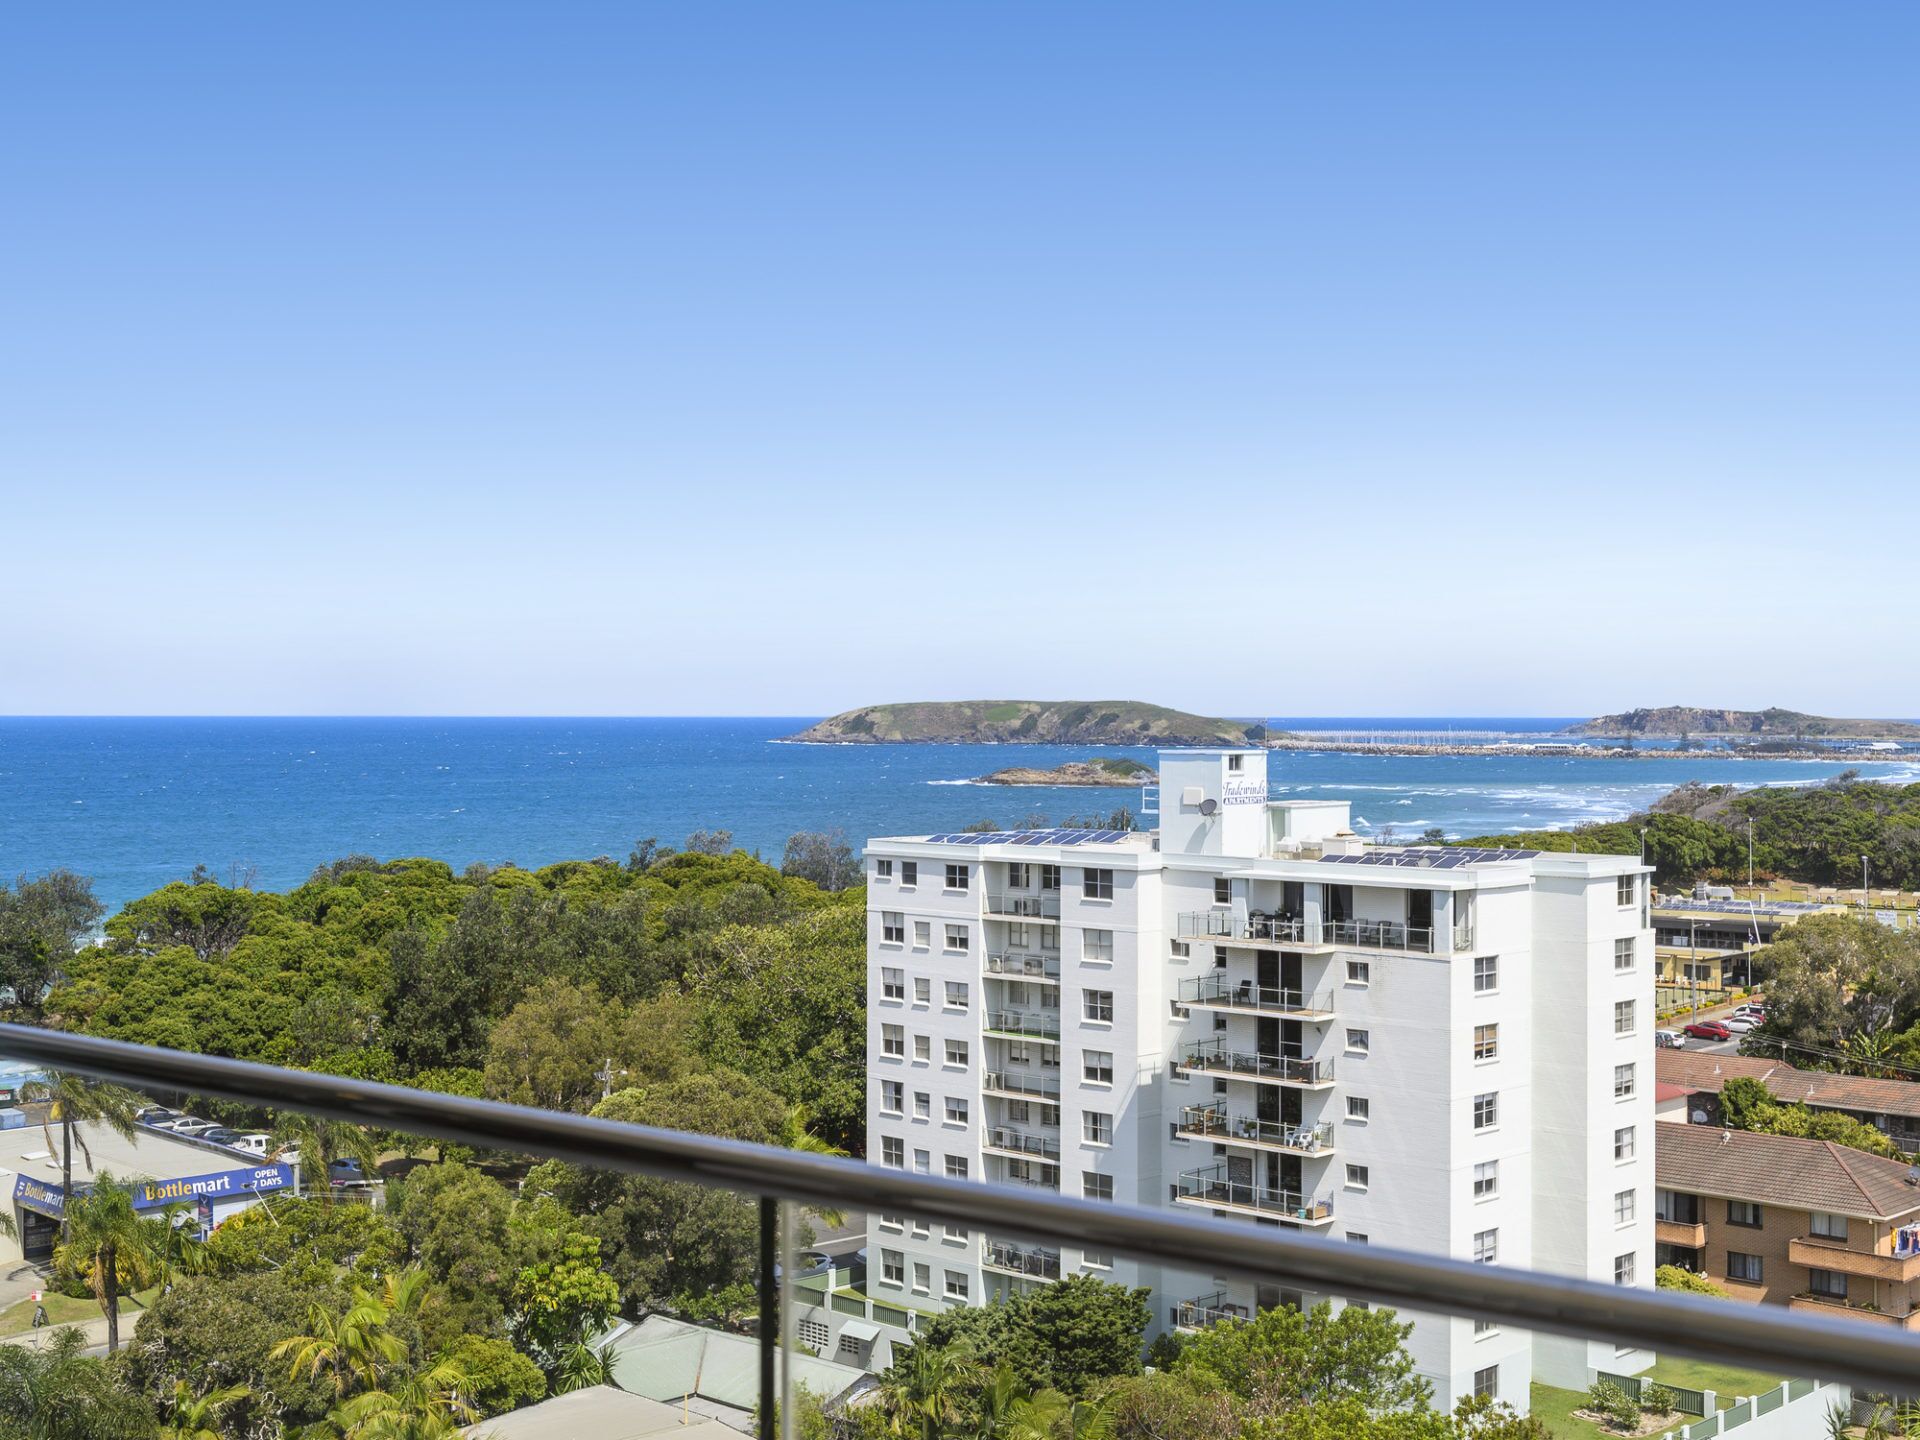 Sub Penthouse With Ocean, Island and Harbour Views of Coffs Harbour